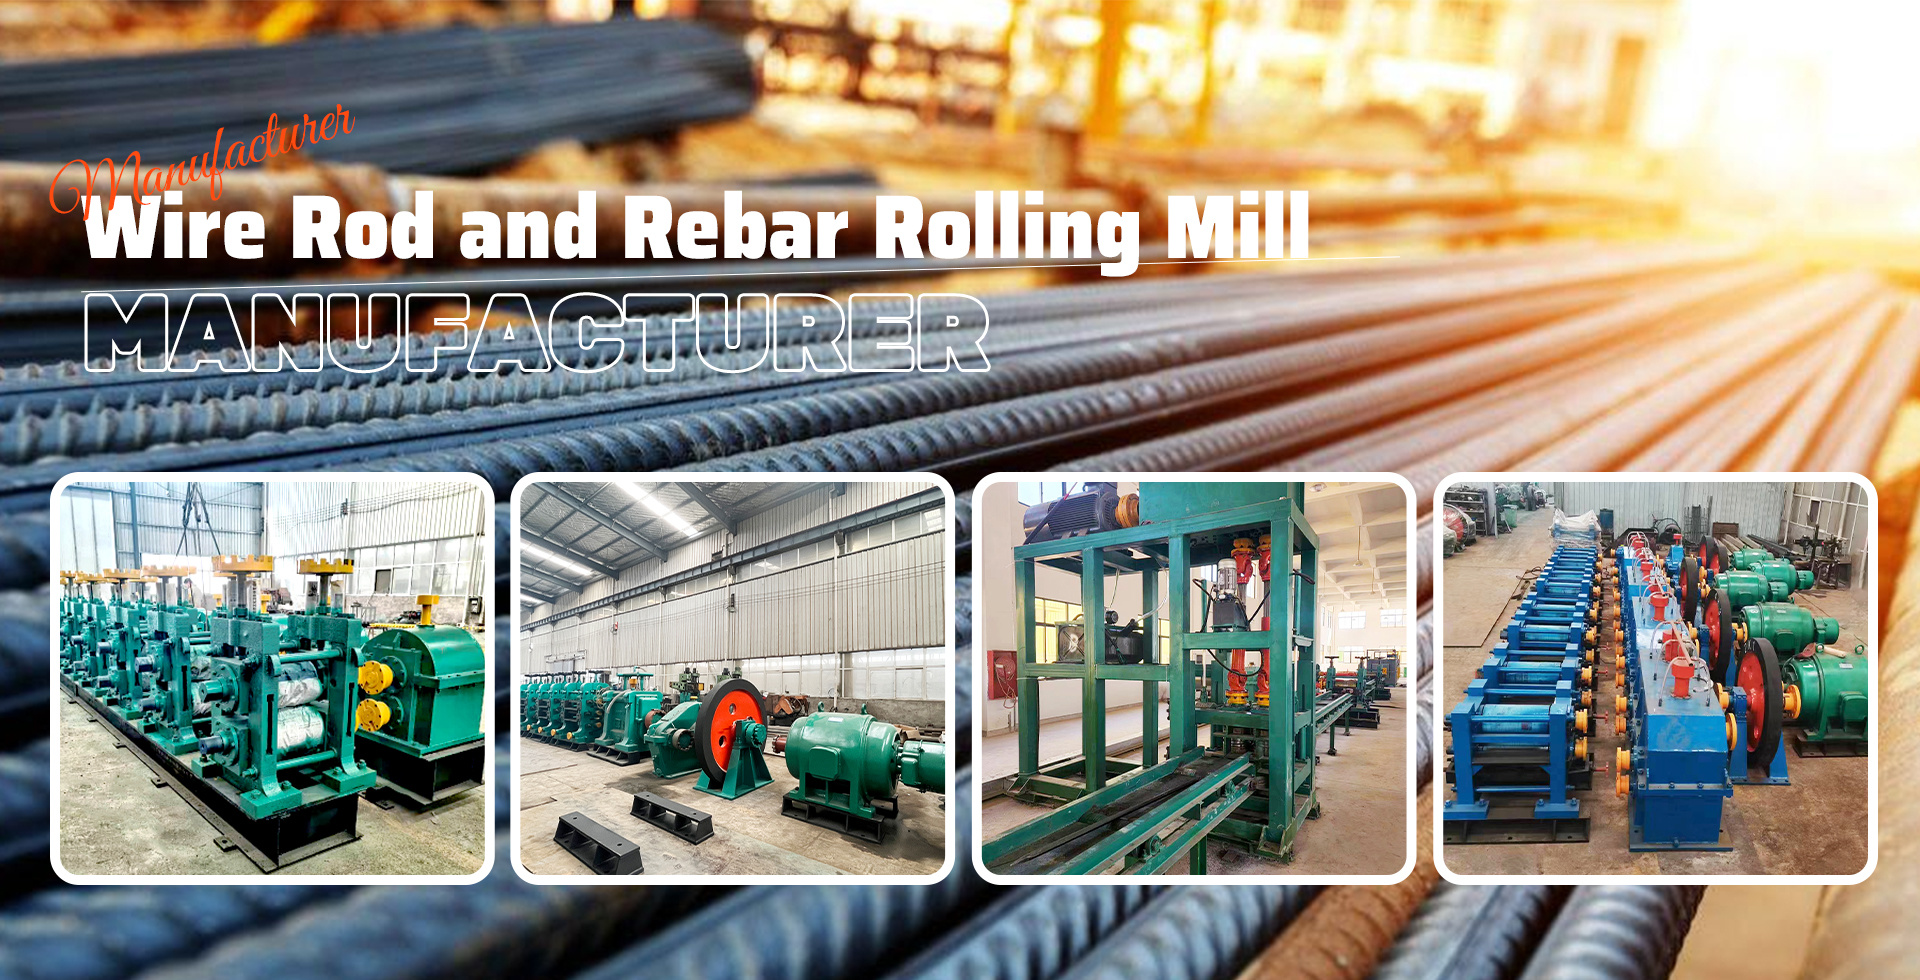 Wird rod and reber rolling mill